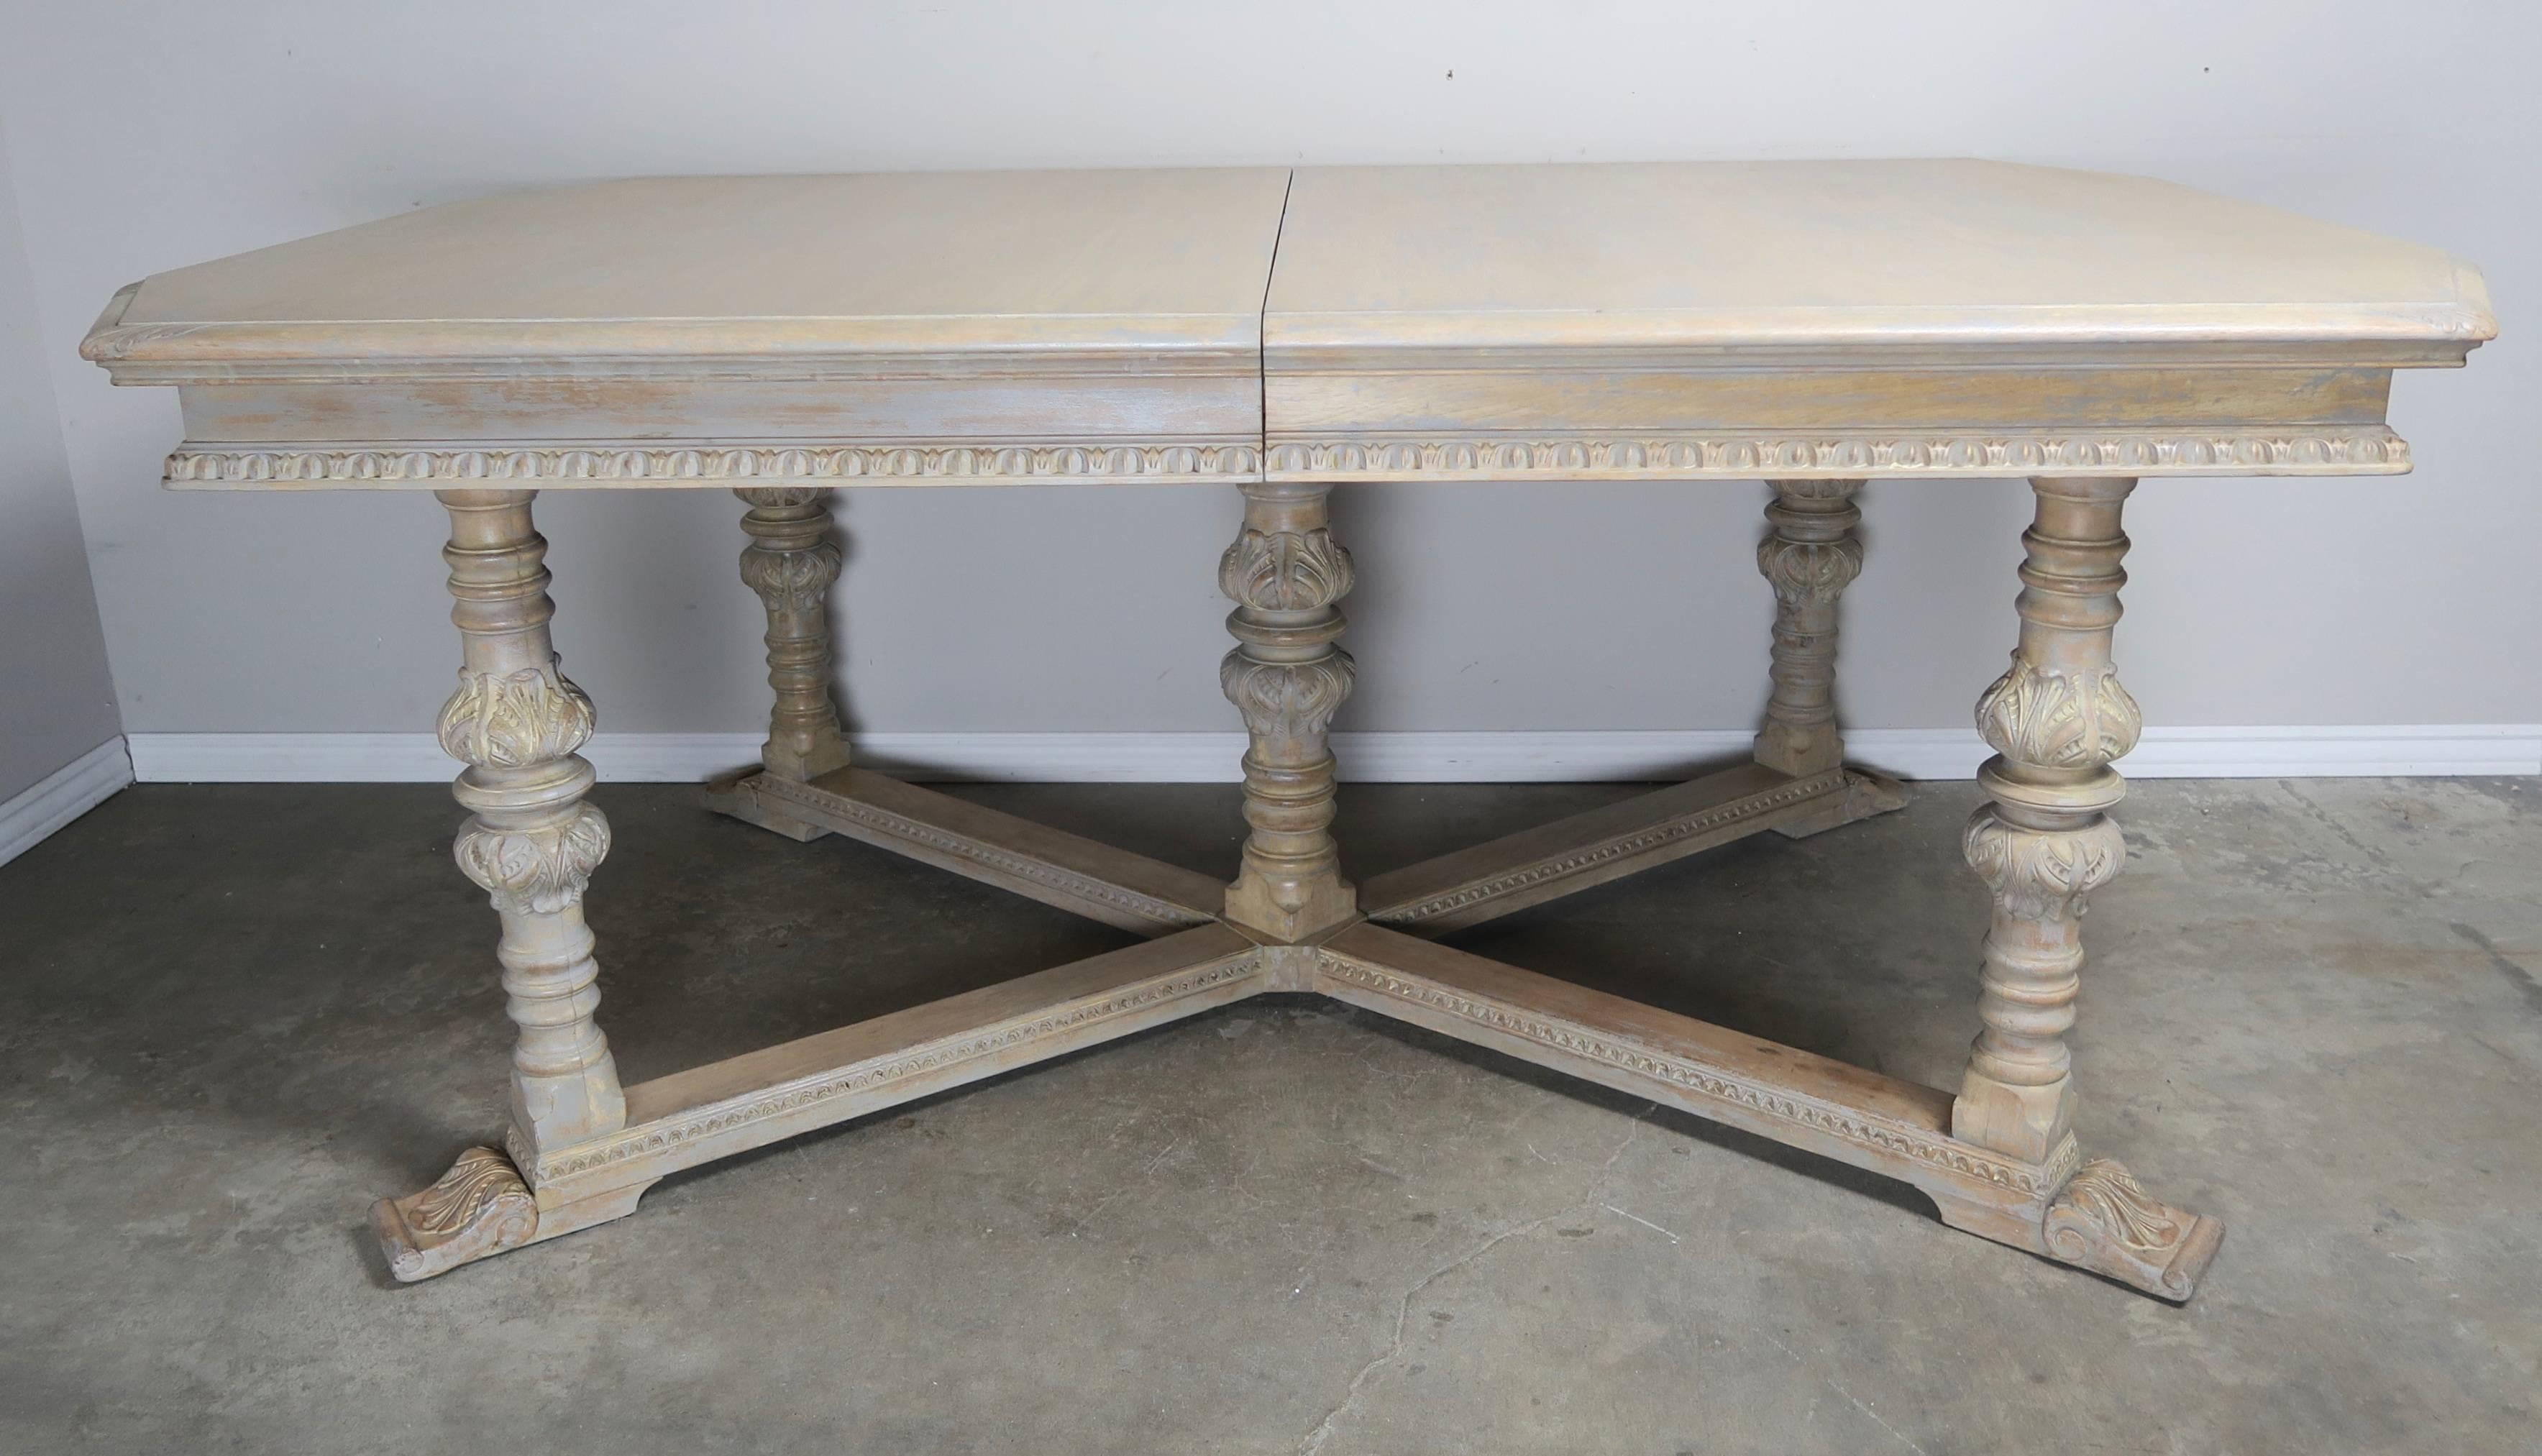 Italian lightly painted neoclassical style dining room table with three leaves. The table stands on five straight legs and are connected by a bottom 